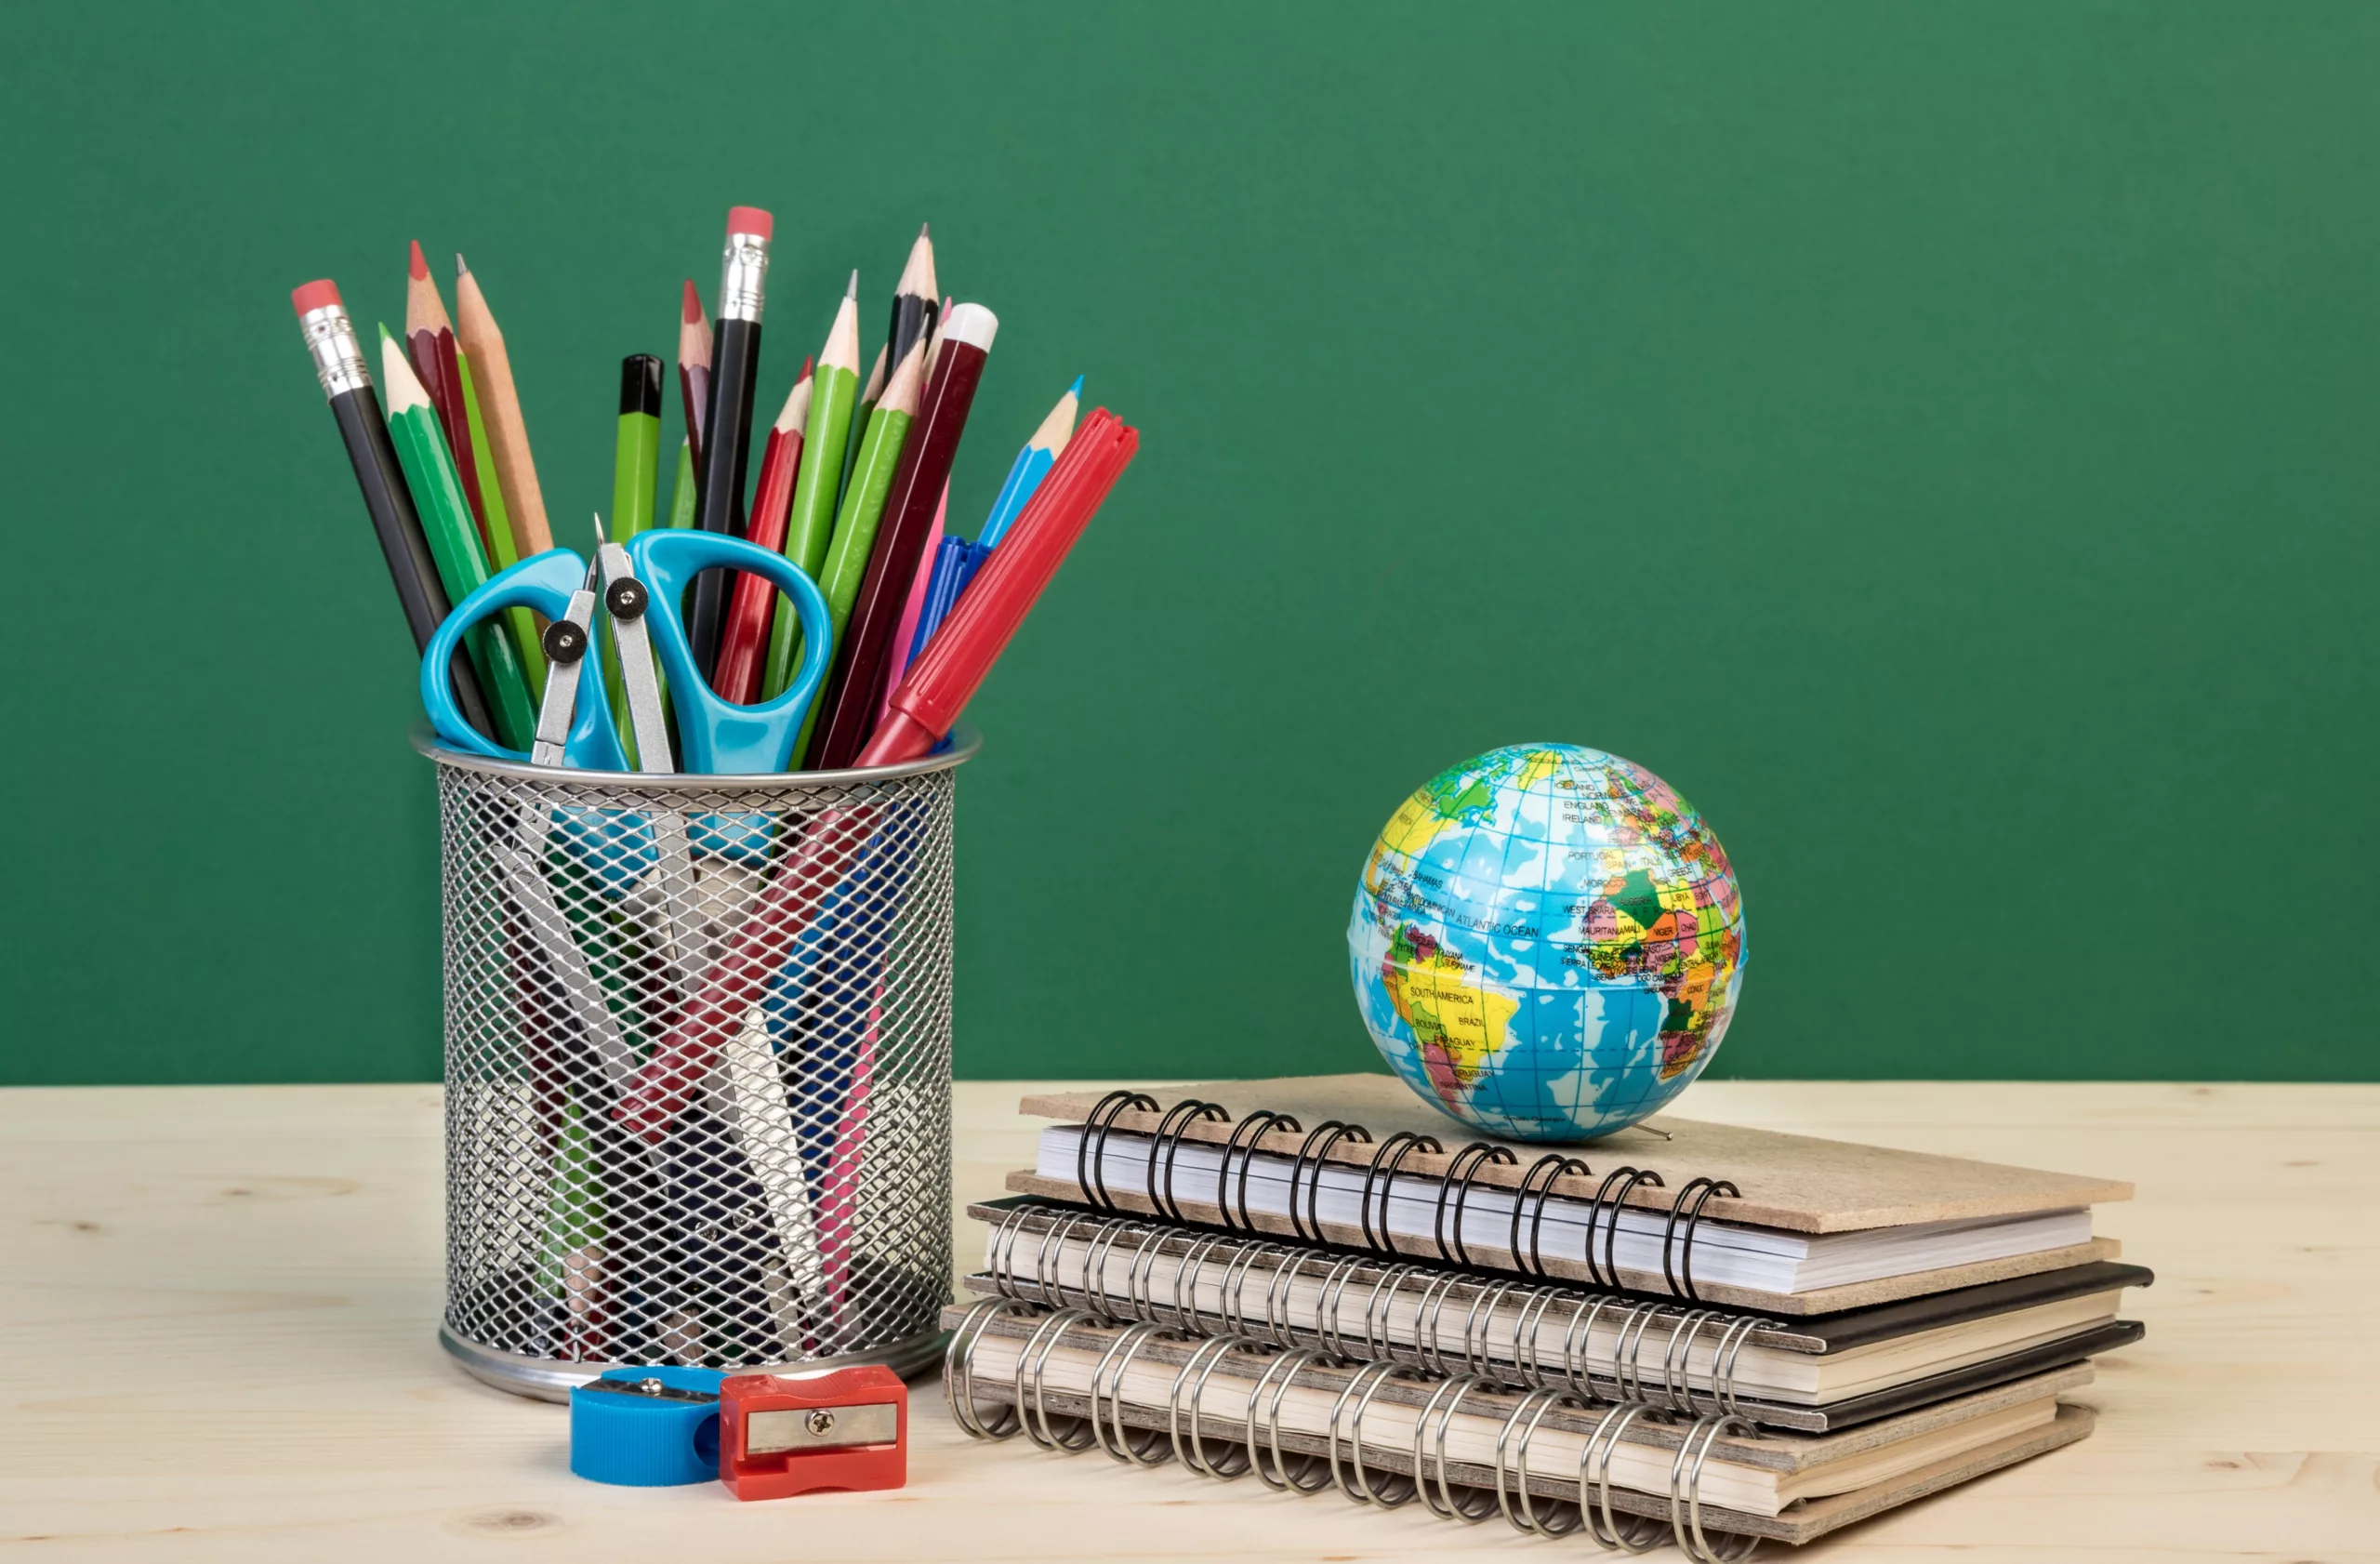 German School Supplies Culture Shock - Who knew they could be so different from American ones?